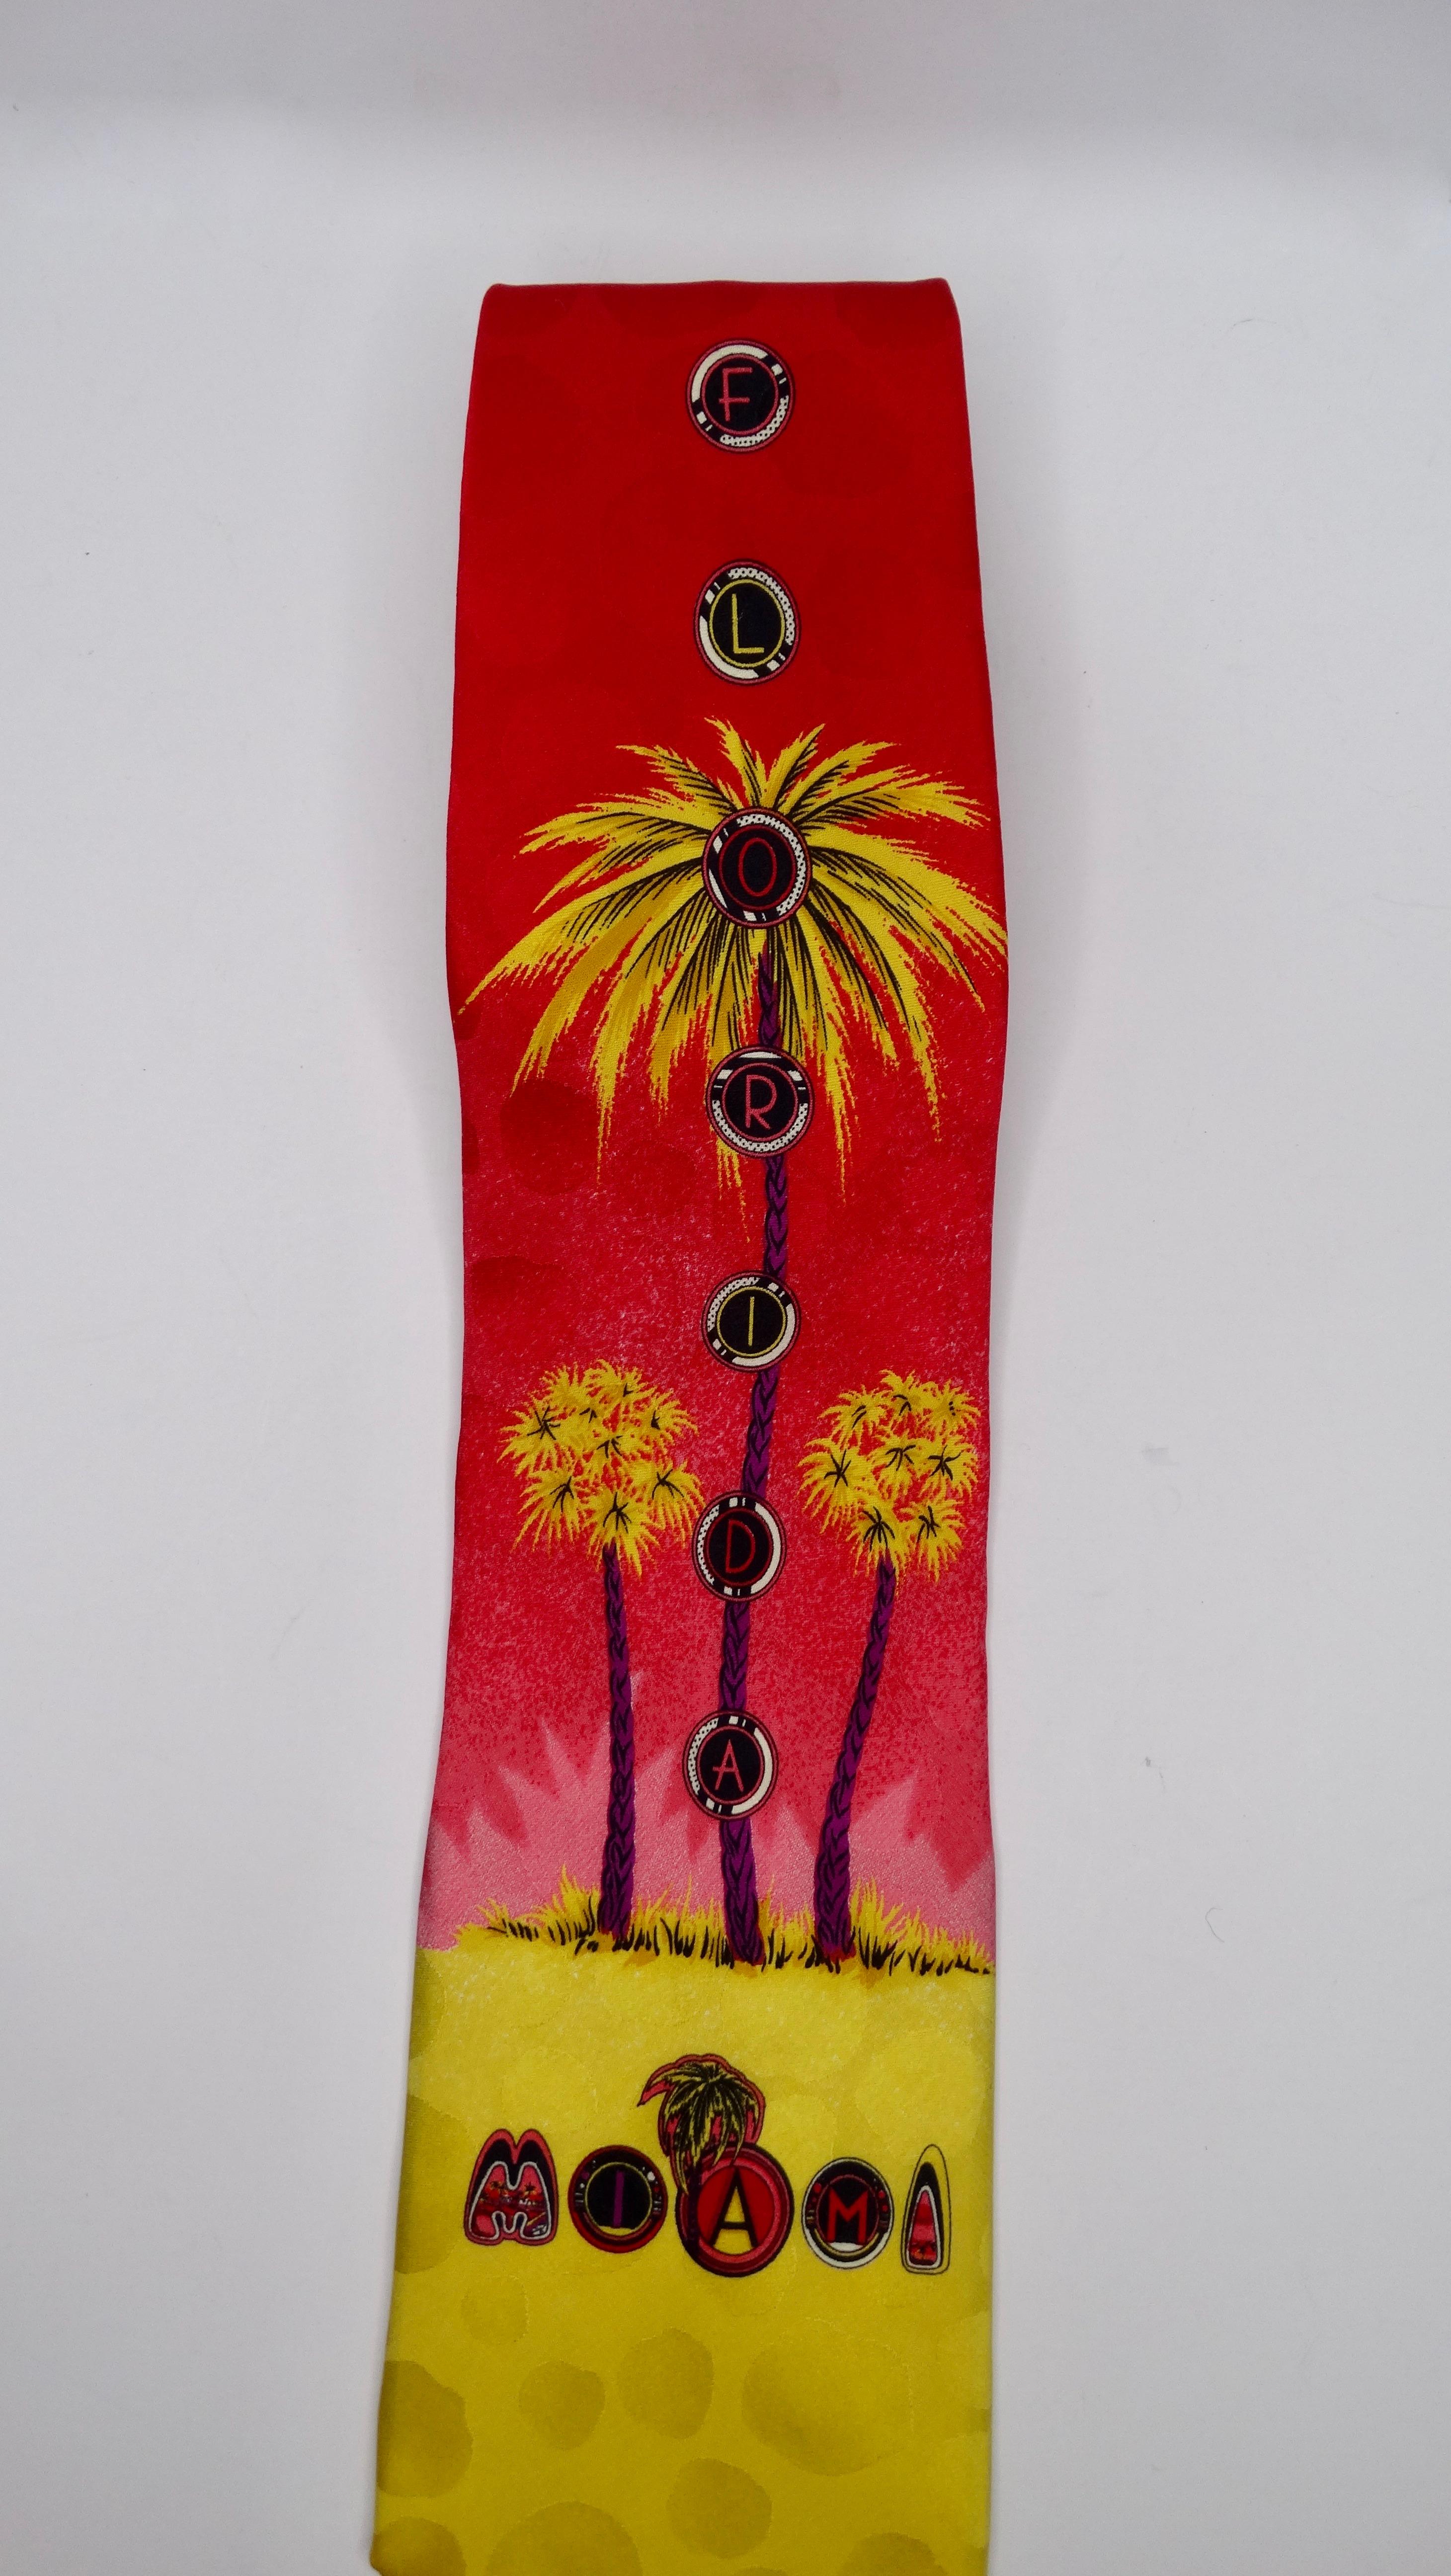 Gianna Versace straight from the archives! Circa 1990s, this silk tie features a Miami inspired print with bright ombre neon colors, polka dots, neon palm trees, and decorative fonts spelling out 